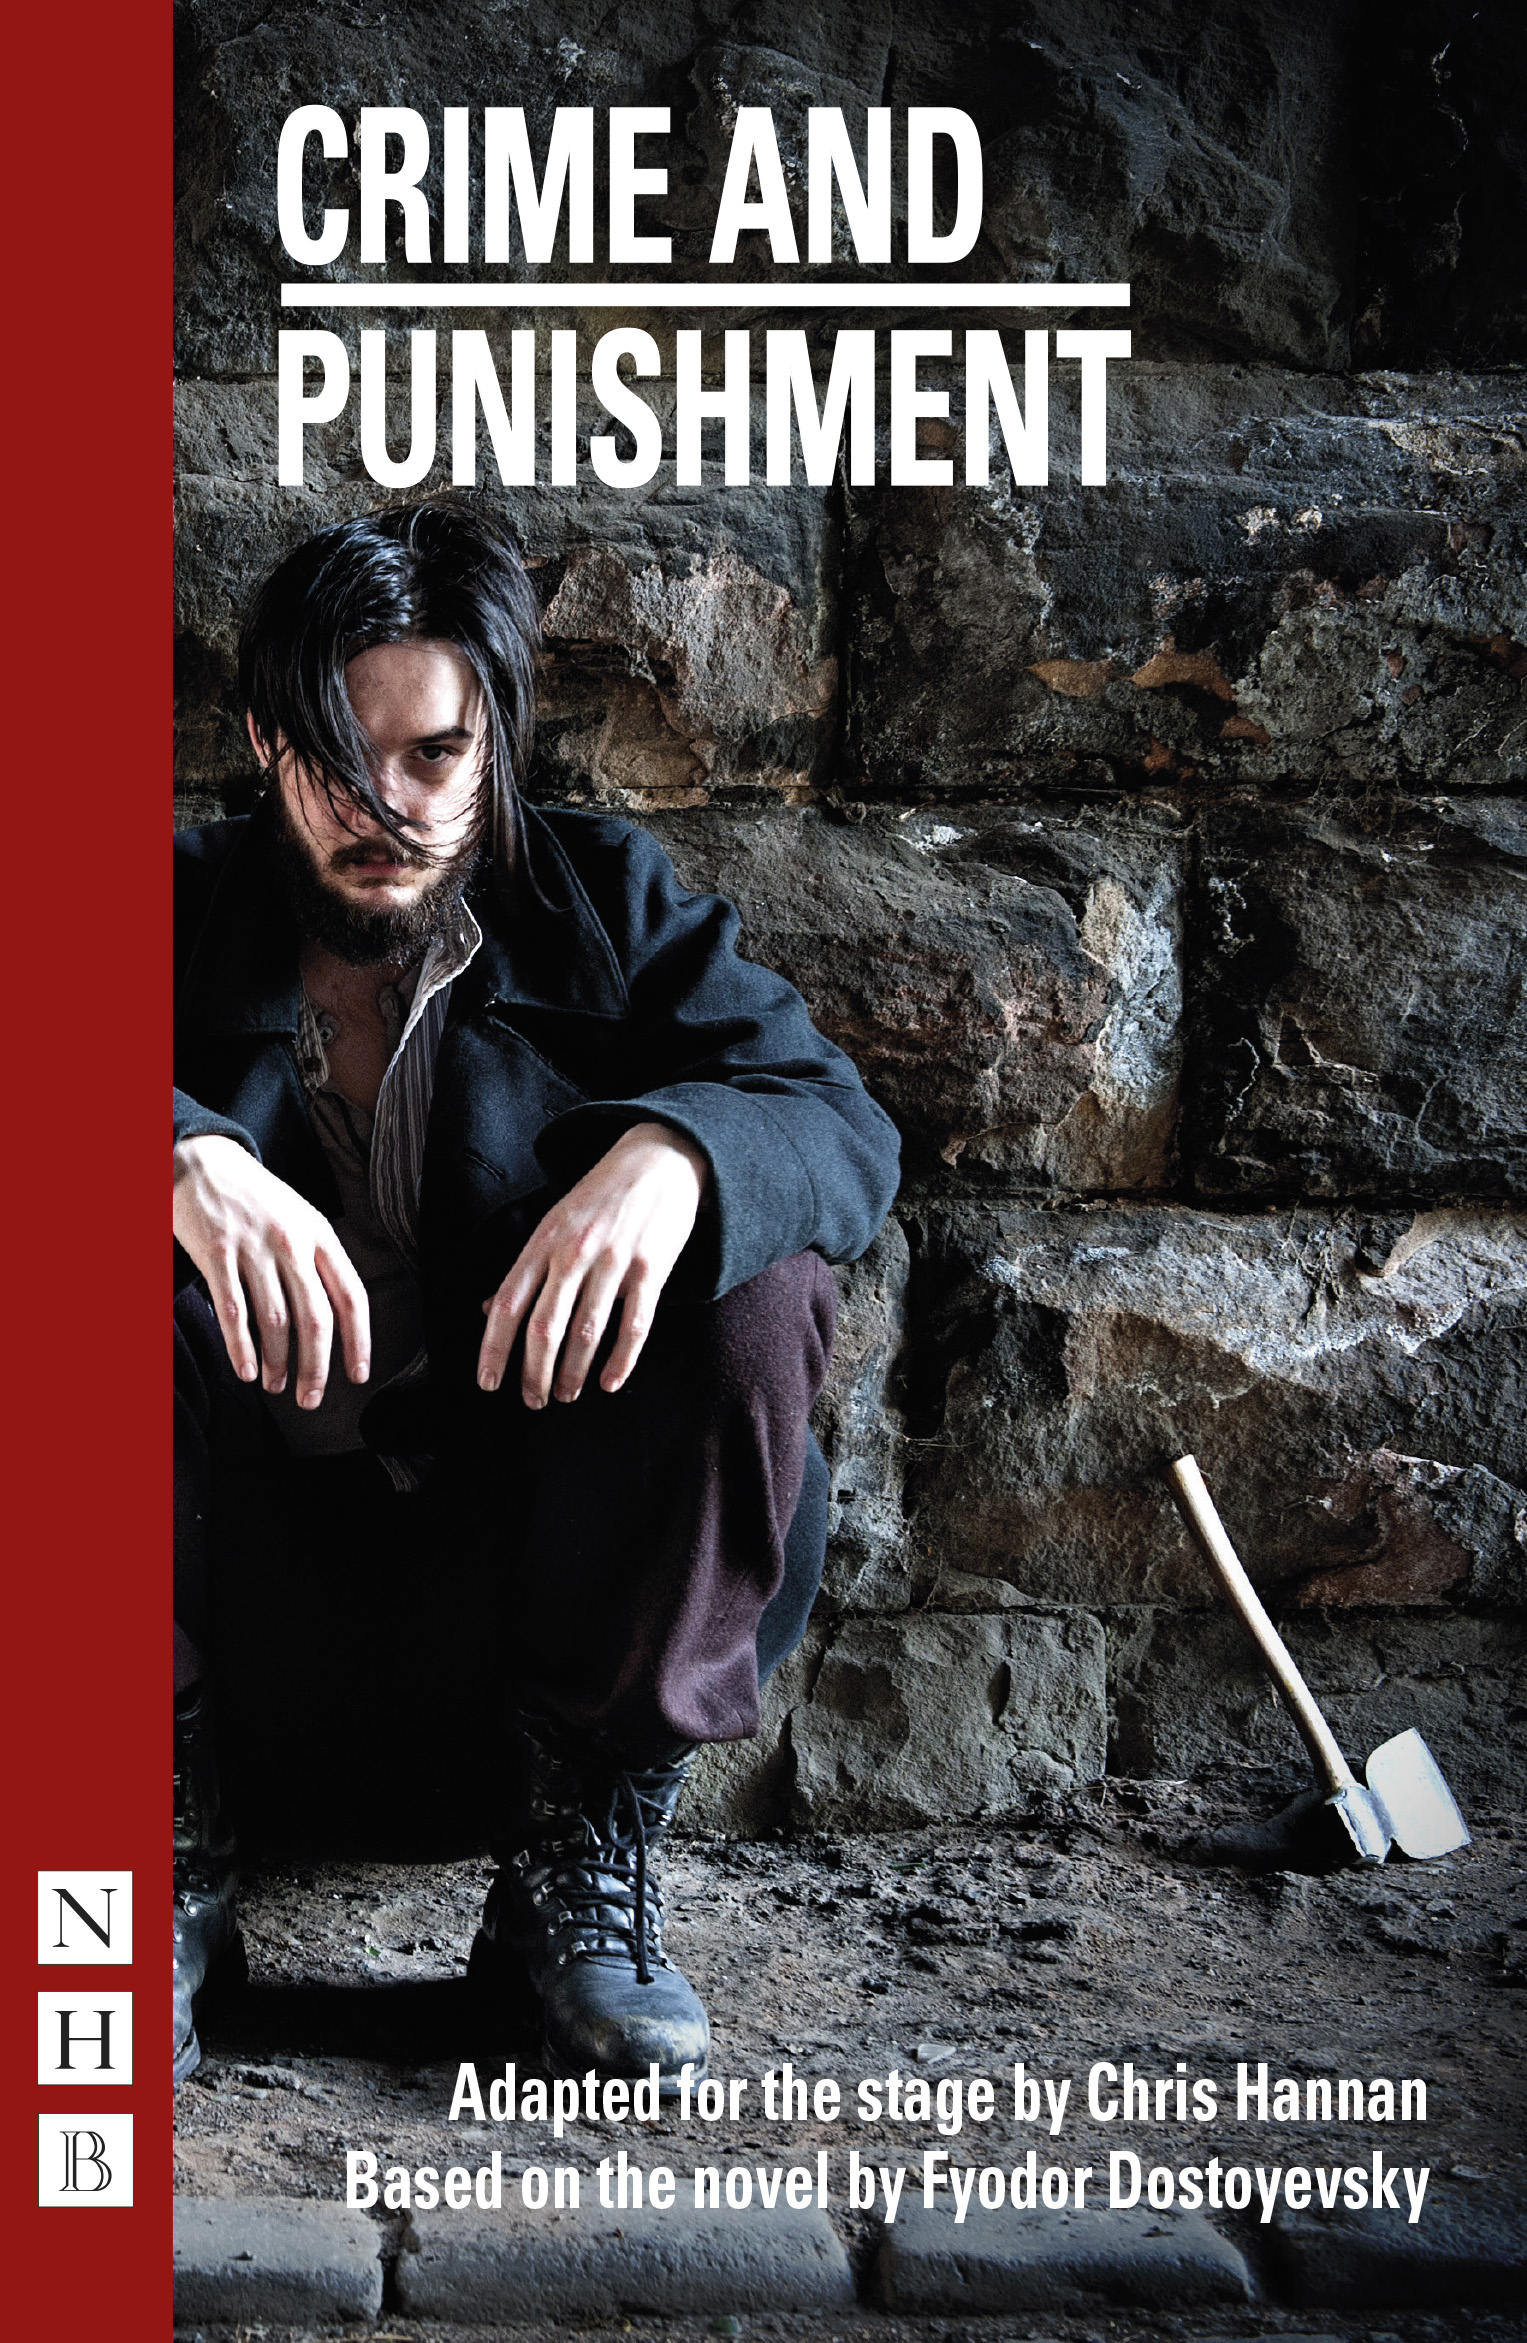 crime and punishment in america by elliott currie